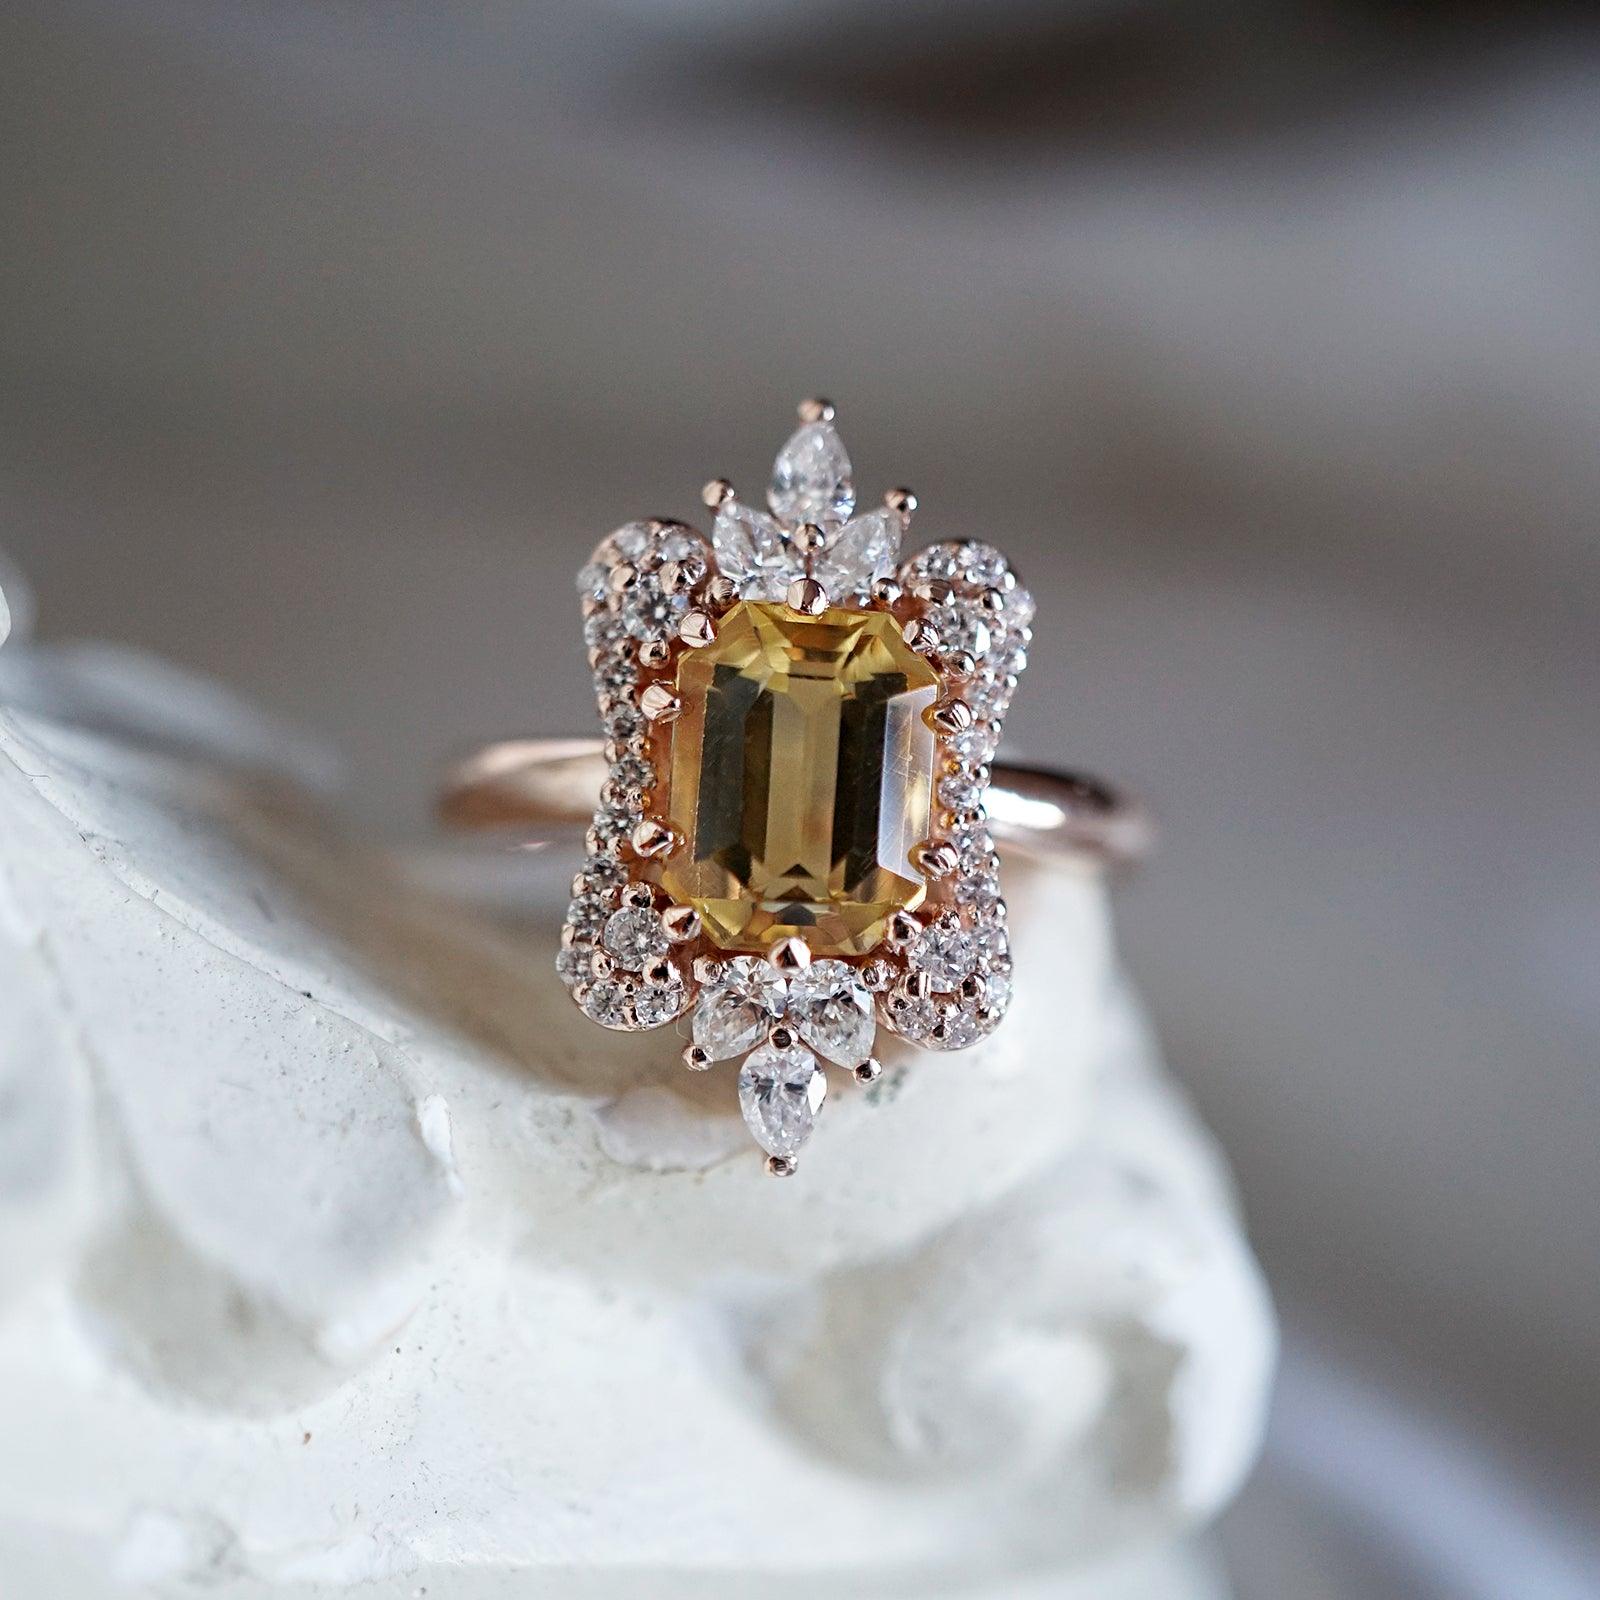 Eleanor Citrine Diamond Ring in 14K and 18K Gold, and Platinum